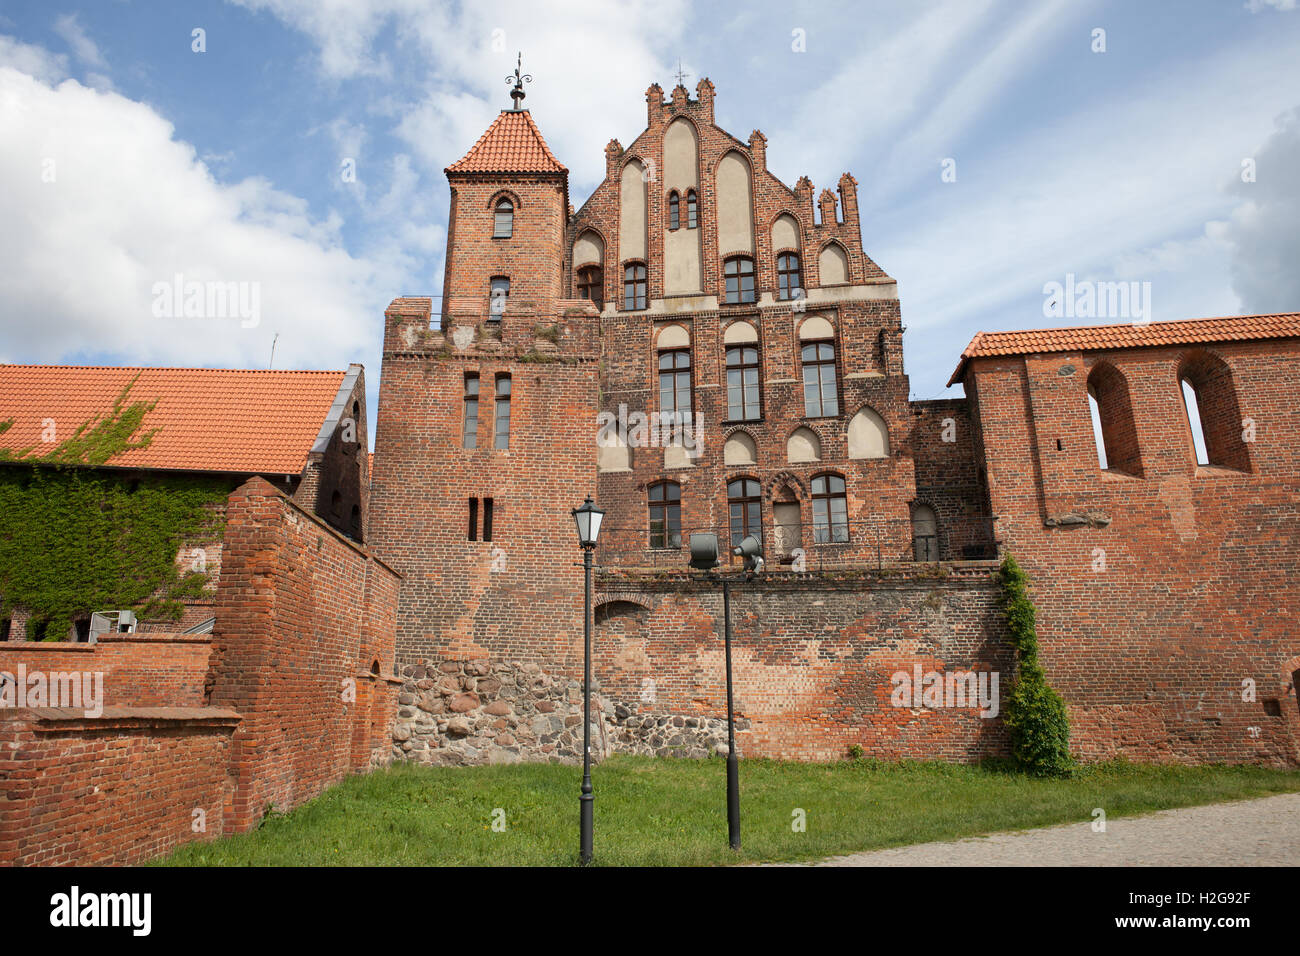 Citizen Court, sentry tower in Torun, Poland, former summer residence of the Brotherhood of St. George, medieval Gothic architec Stock Photo